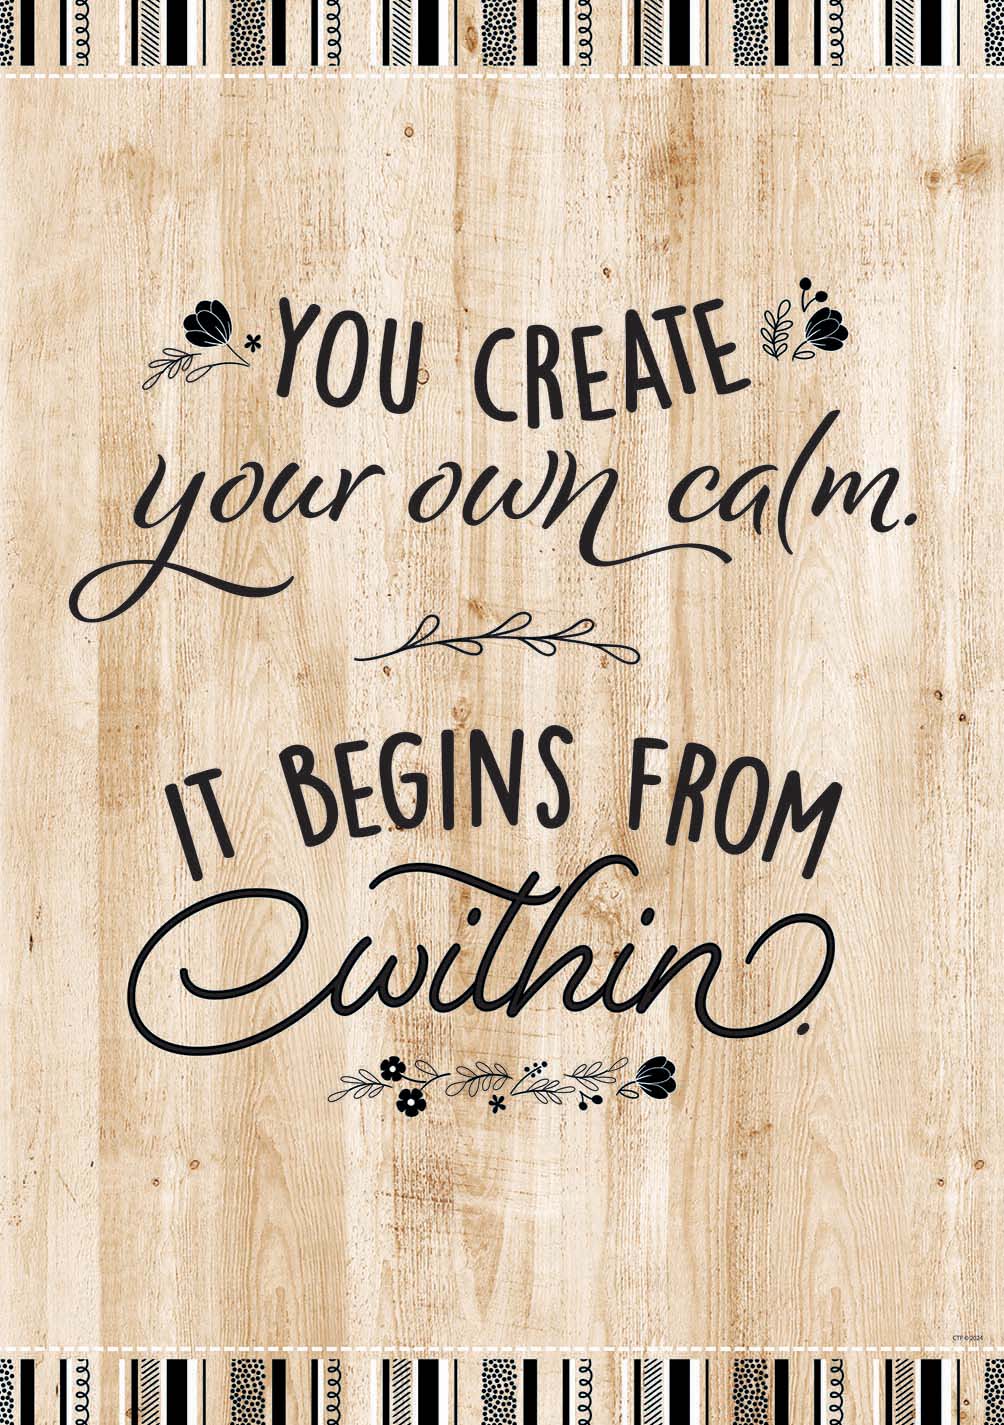 CTP Core Decor You Create Your Own Calm Inspire U Poster (CTP 10961)